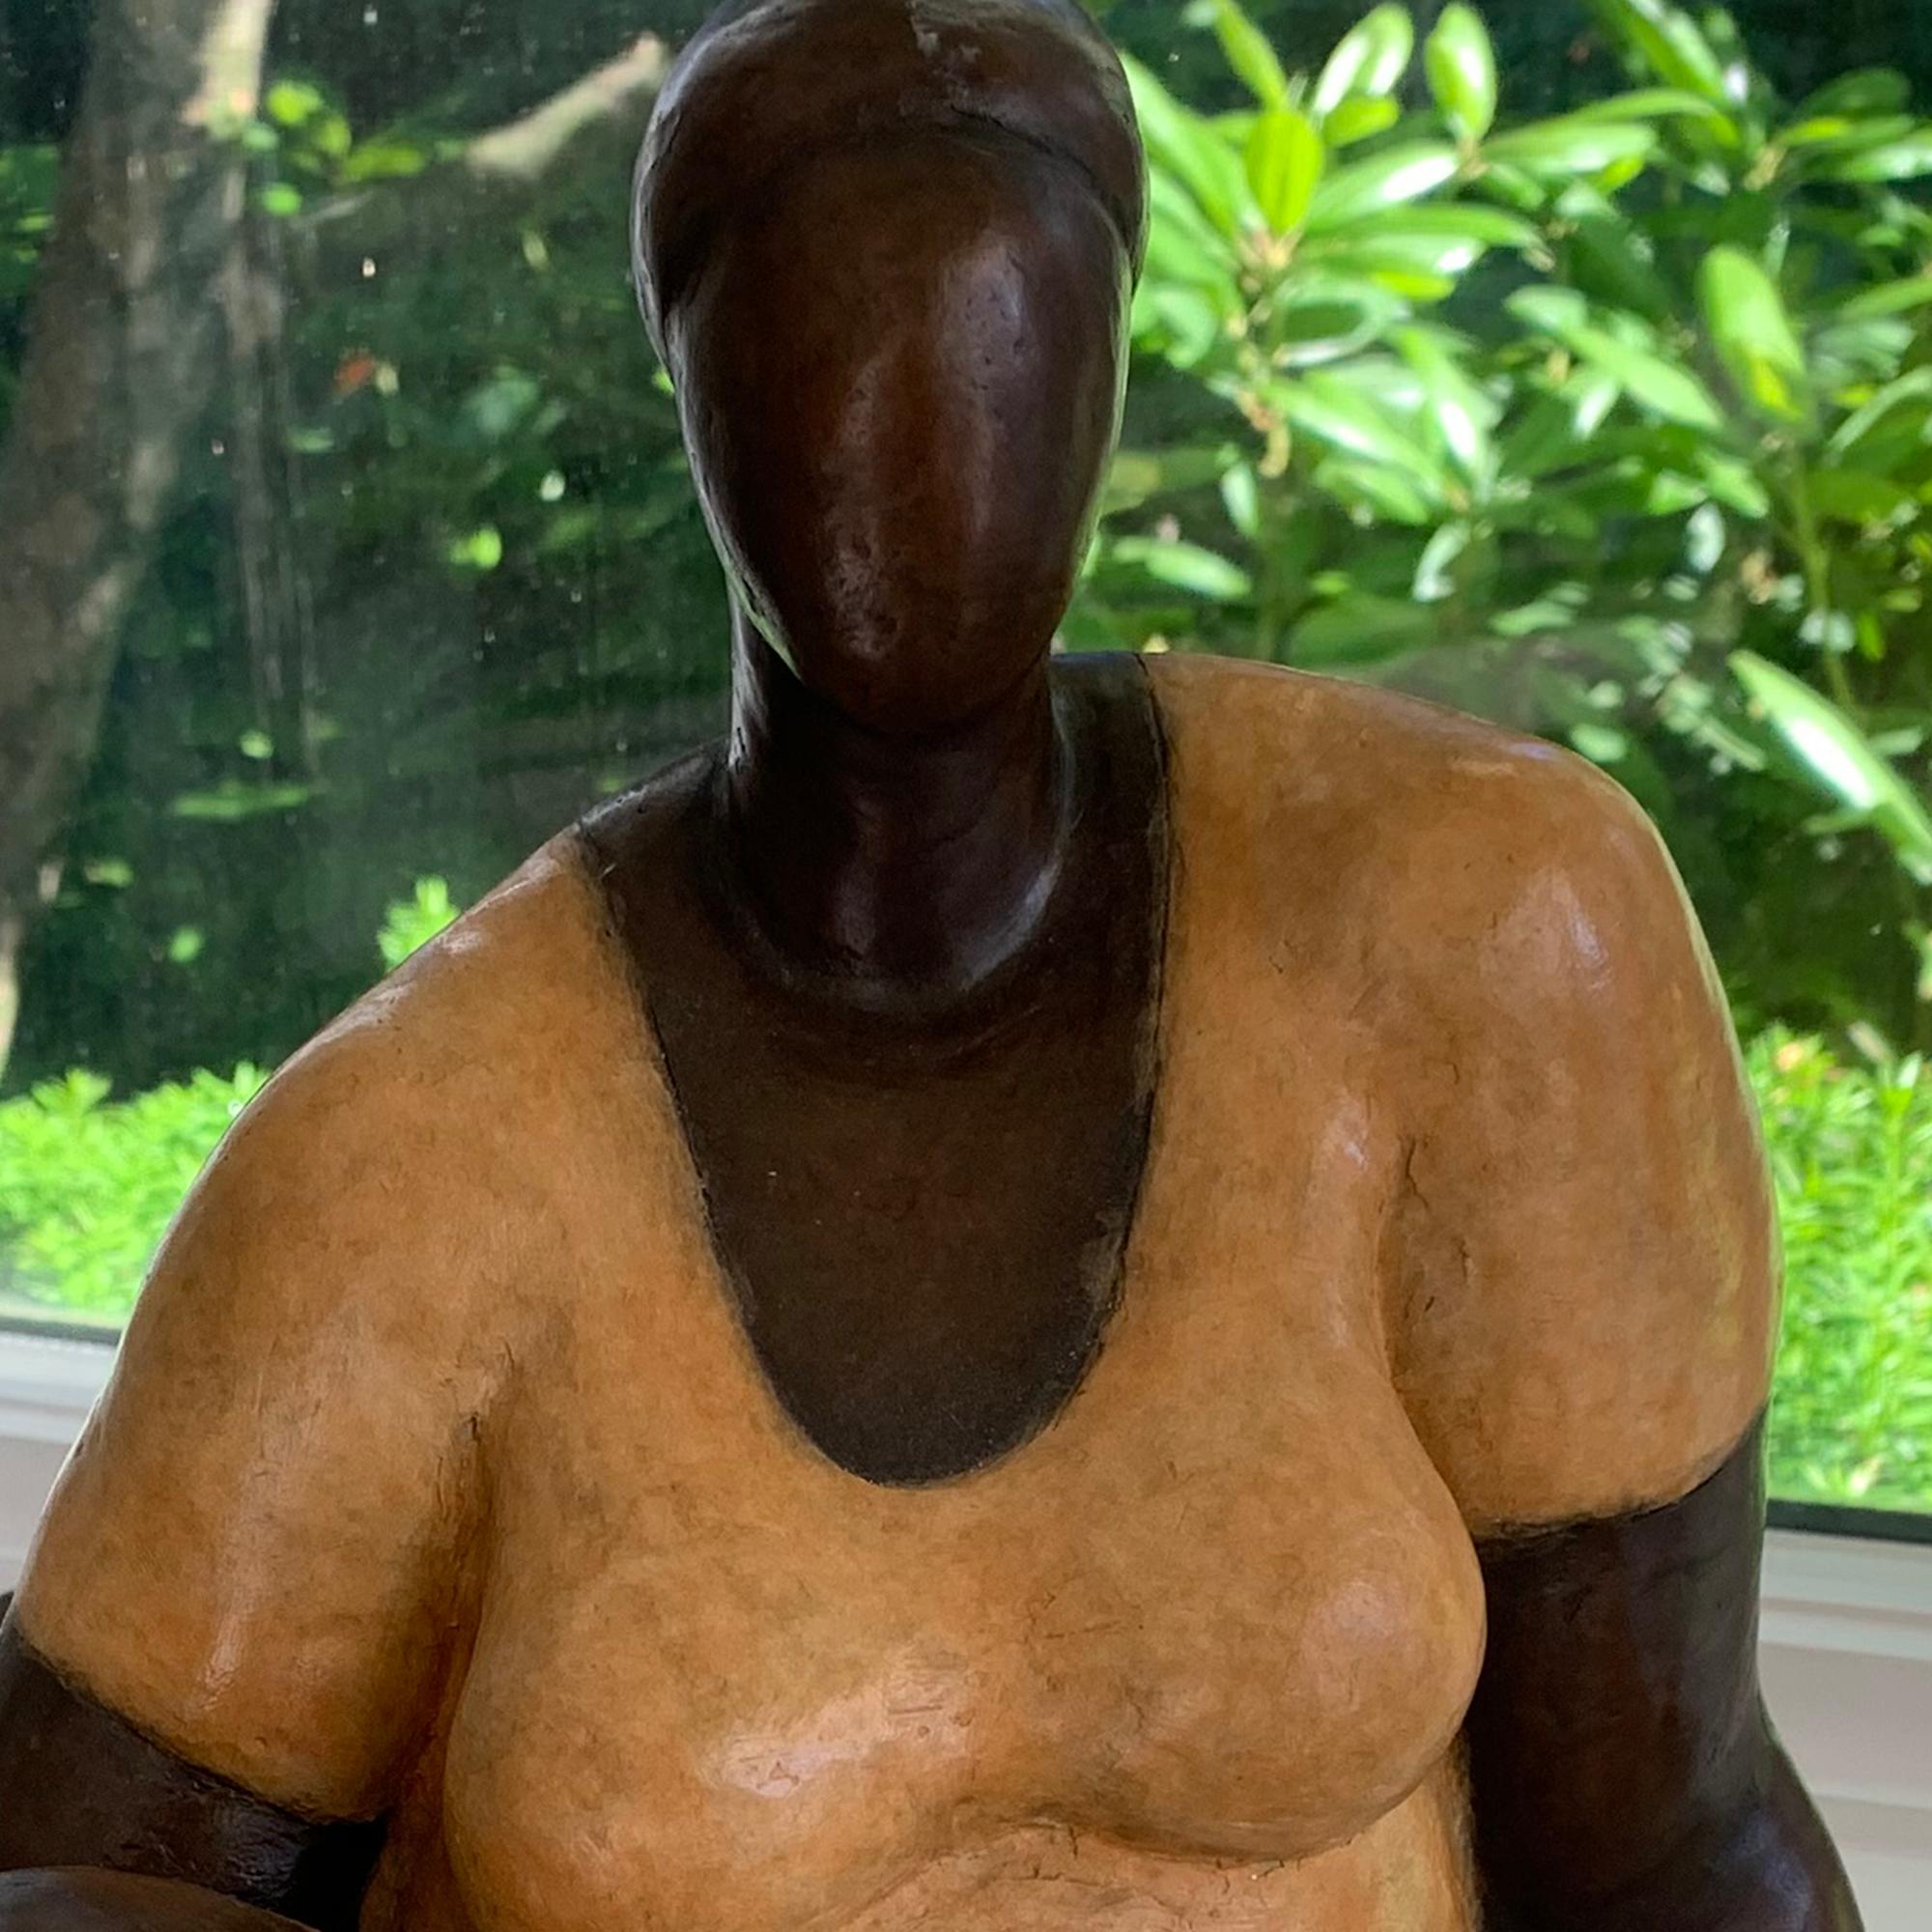 'Damsel' Cast Bronze Sculpture with Patina and Lacquer Finish - Gold Figurative Sculpture by Nnamdi Okonkwo